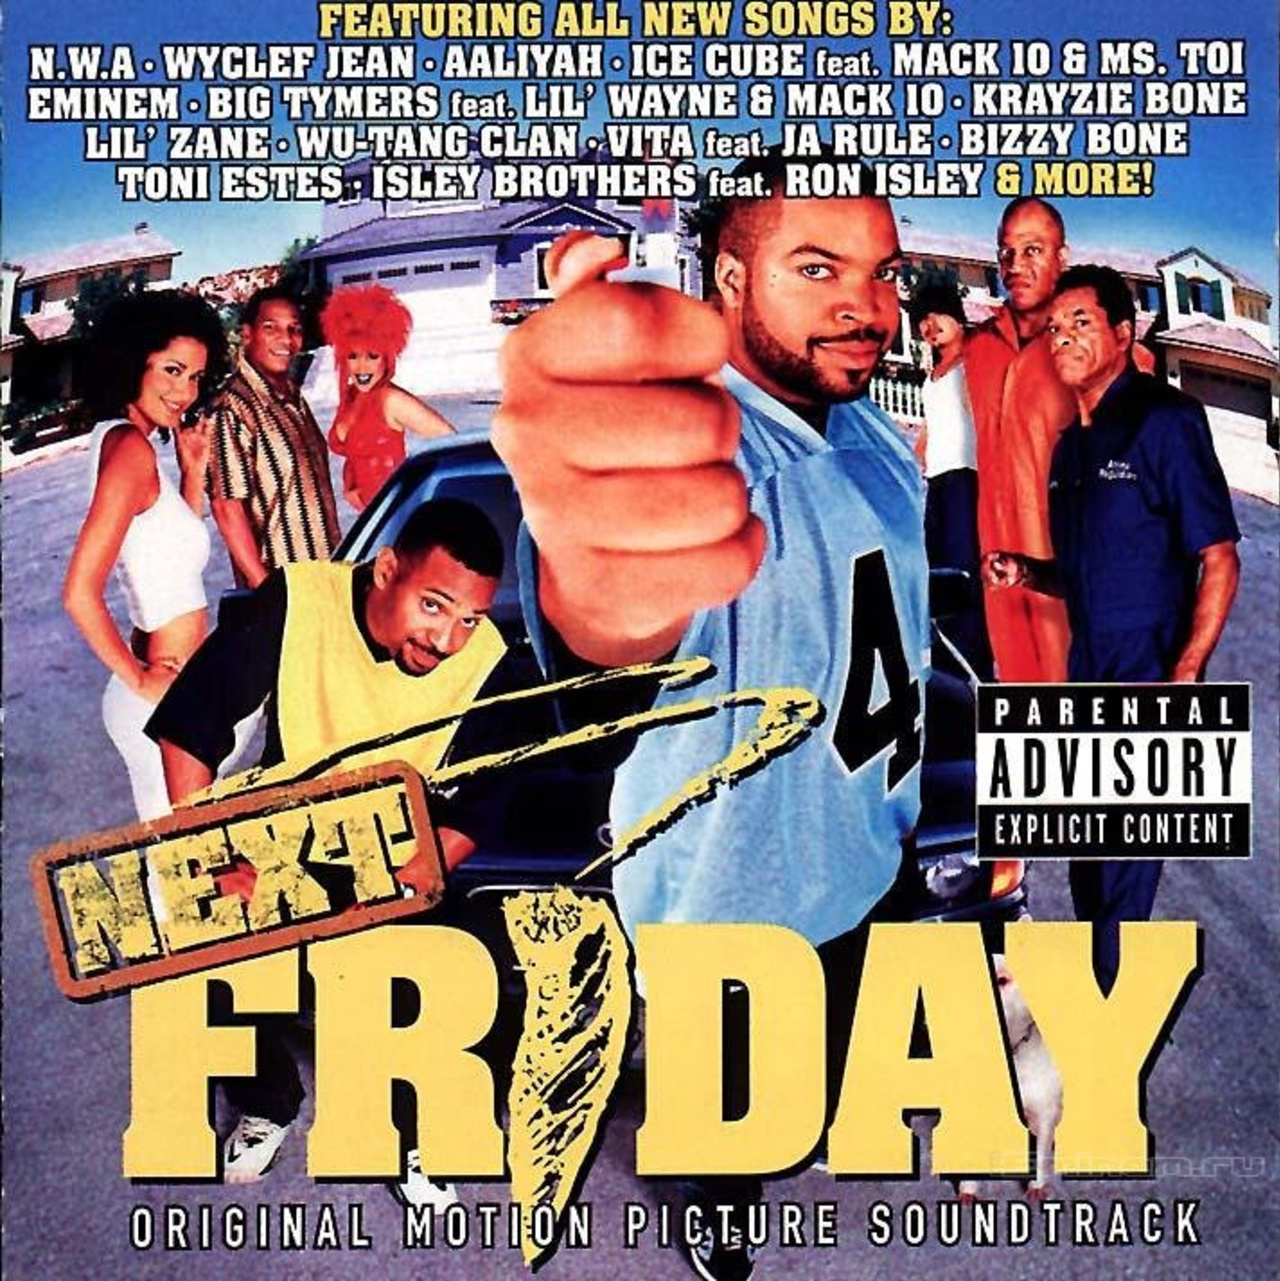 NEXT FRIDAY (2000): "You Can Do It," Ice Cube feat. Mack 10 & Ms. Toi; "Chin Check," N.W.A.